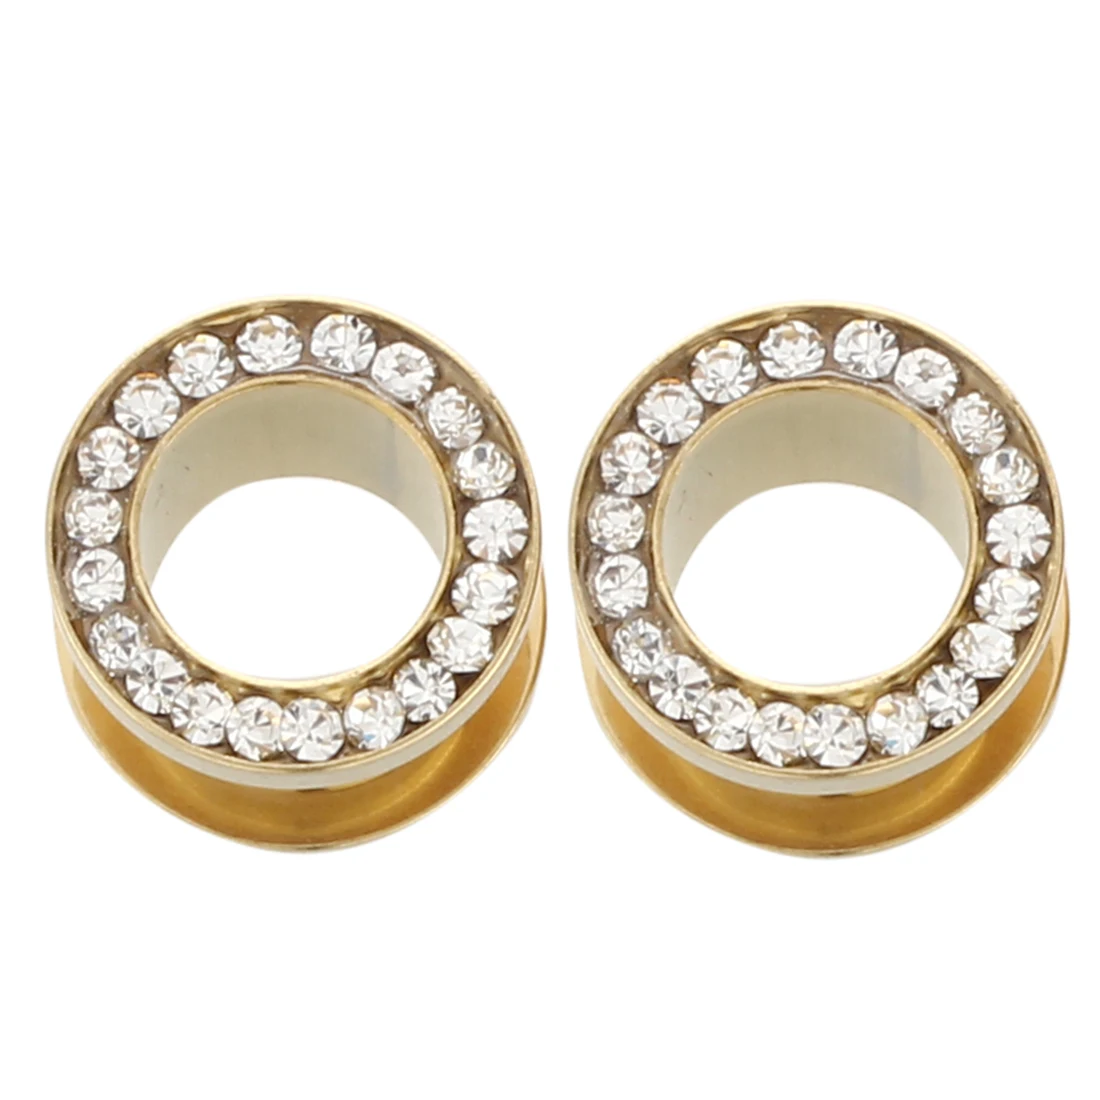 PAIR of GOLD Plated CLEAR Gem Rim EAR Gauges PLUGS Rings TUNNEL Piercing Jewelry